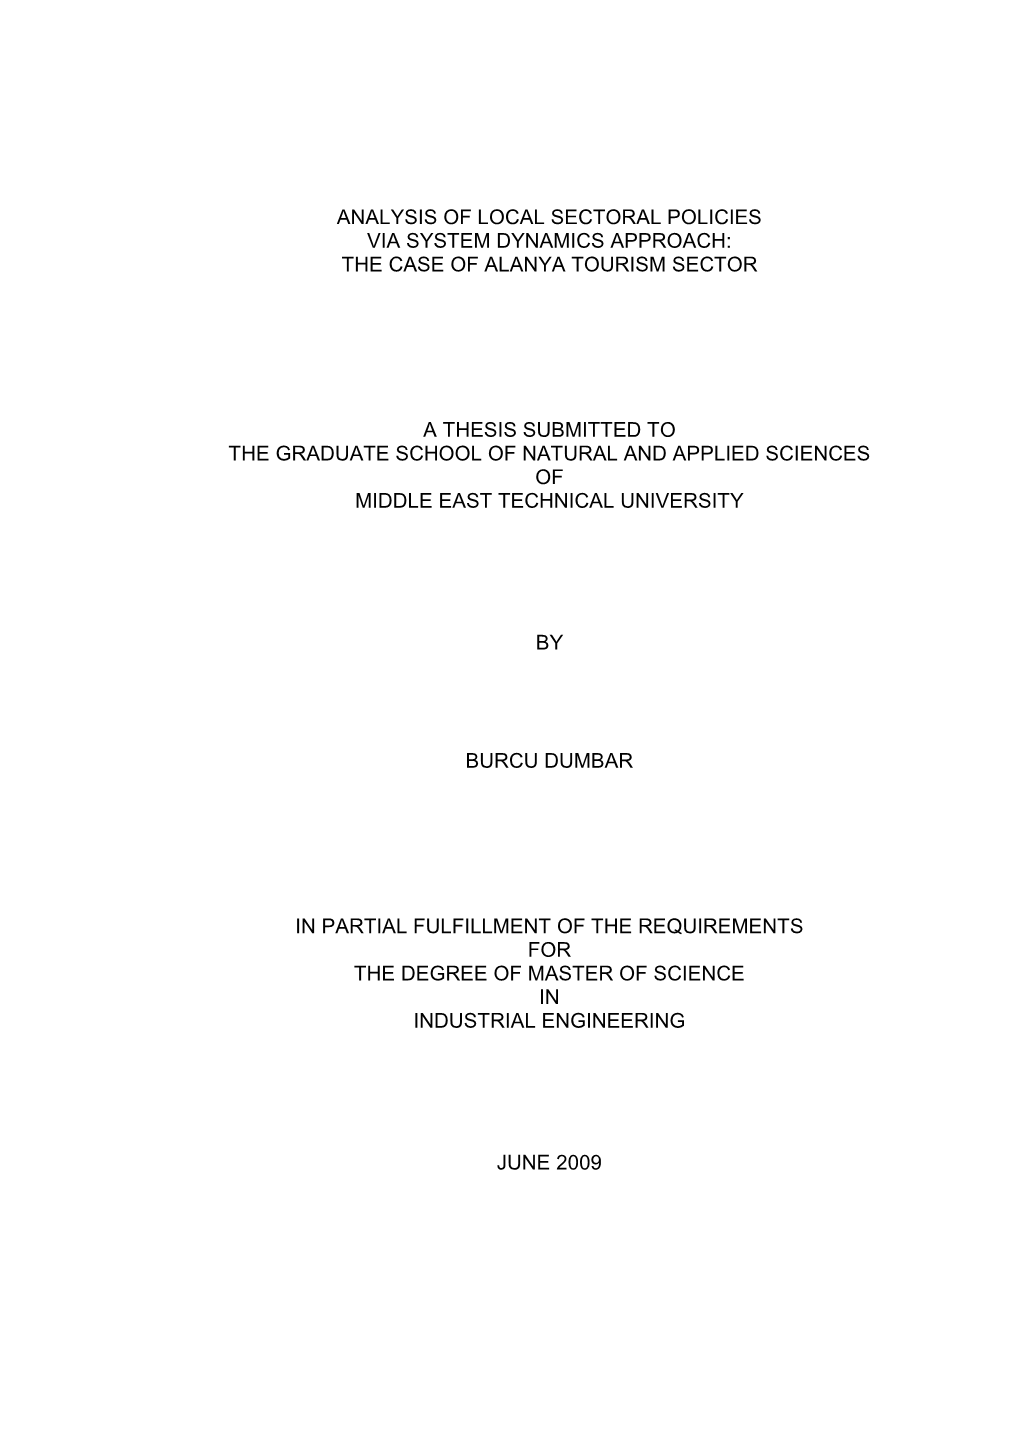 Analysis of Local Sectoral Policies Via System Dynamics Approach: the Case of Alanya Tourism Sector a Thesis Submitted to the Gr